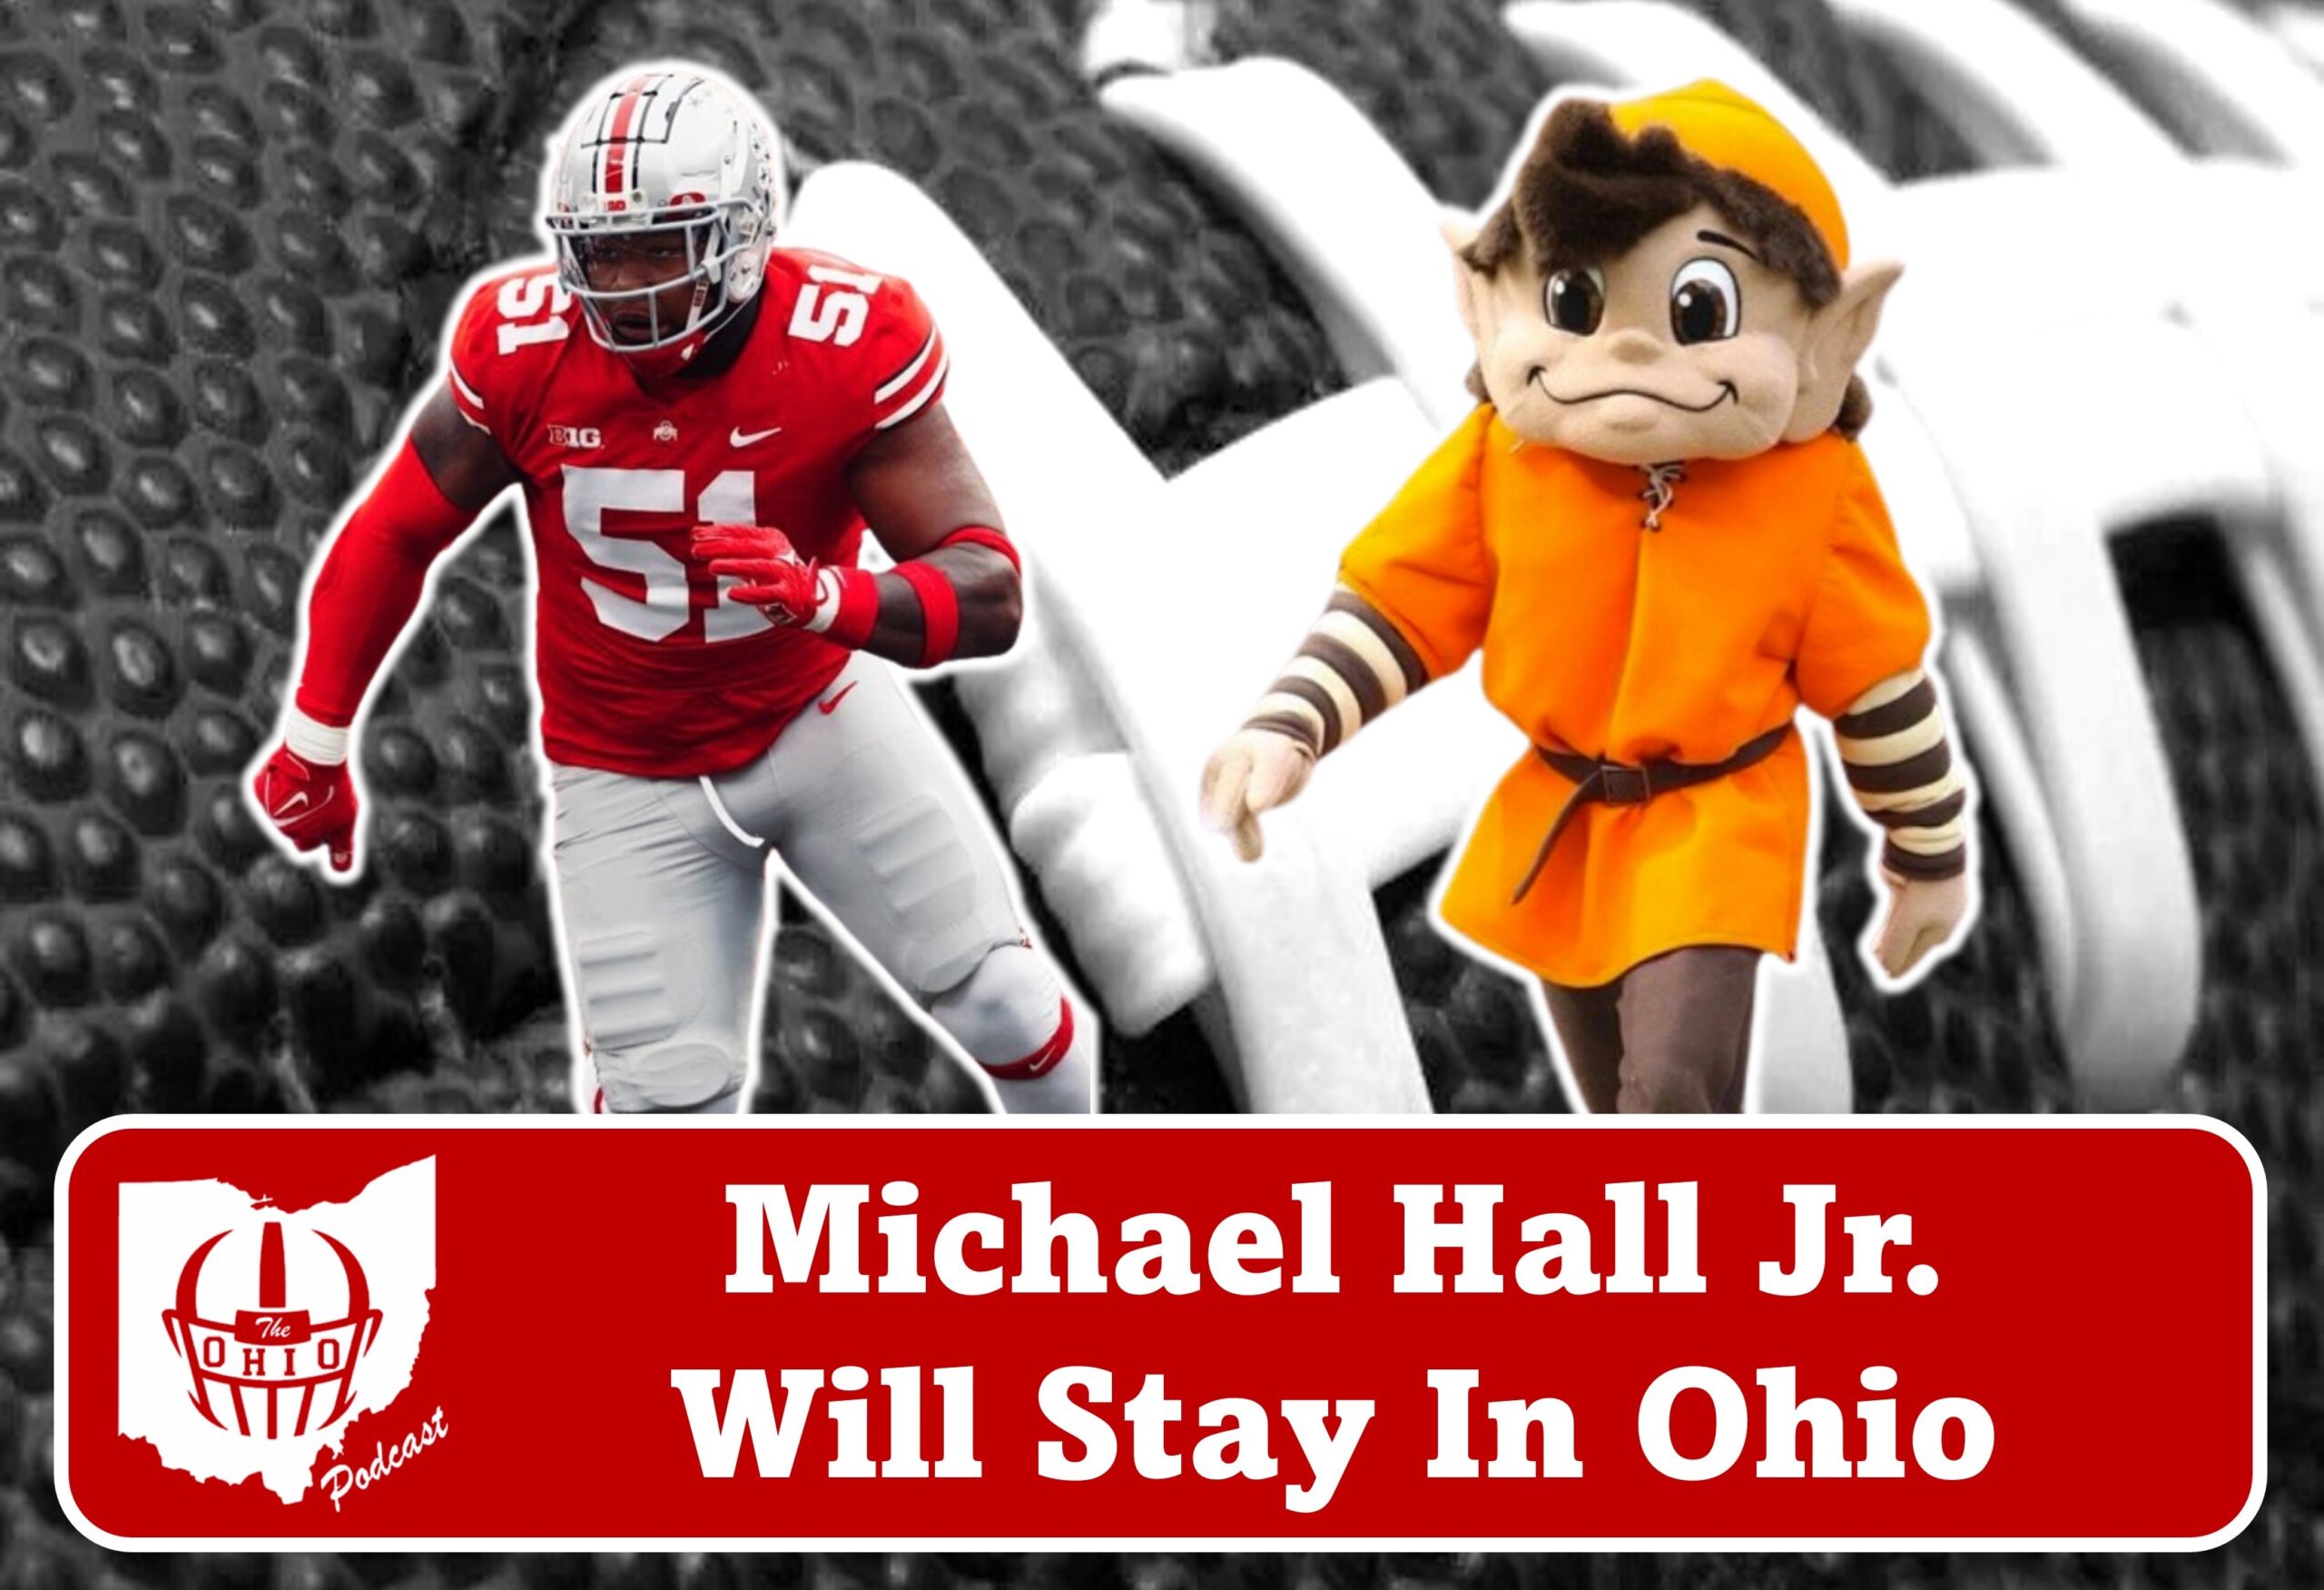 Michael Hall will Stay in Ohio